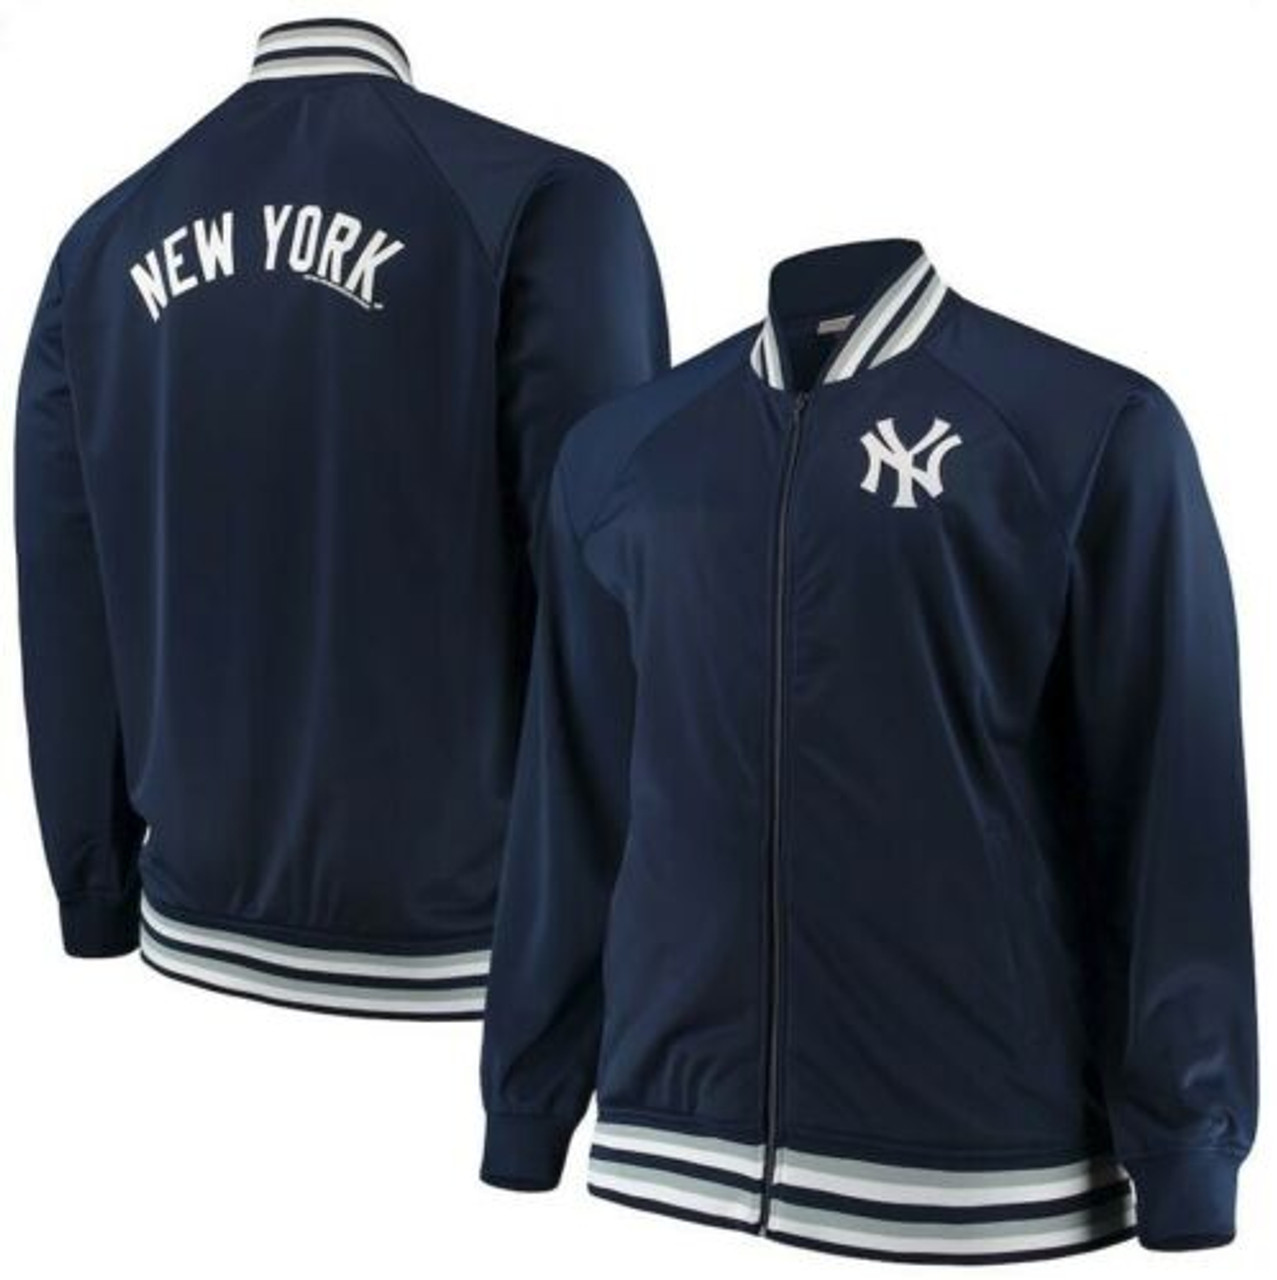 Majestic New York Yankee Official Warm Up Jacket Men's Small